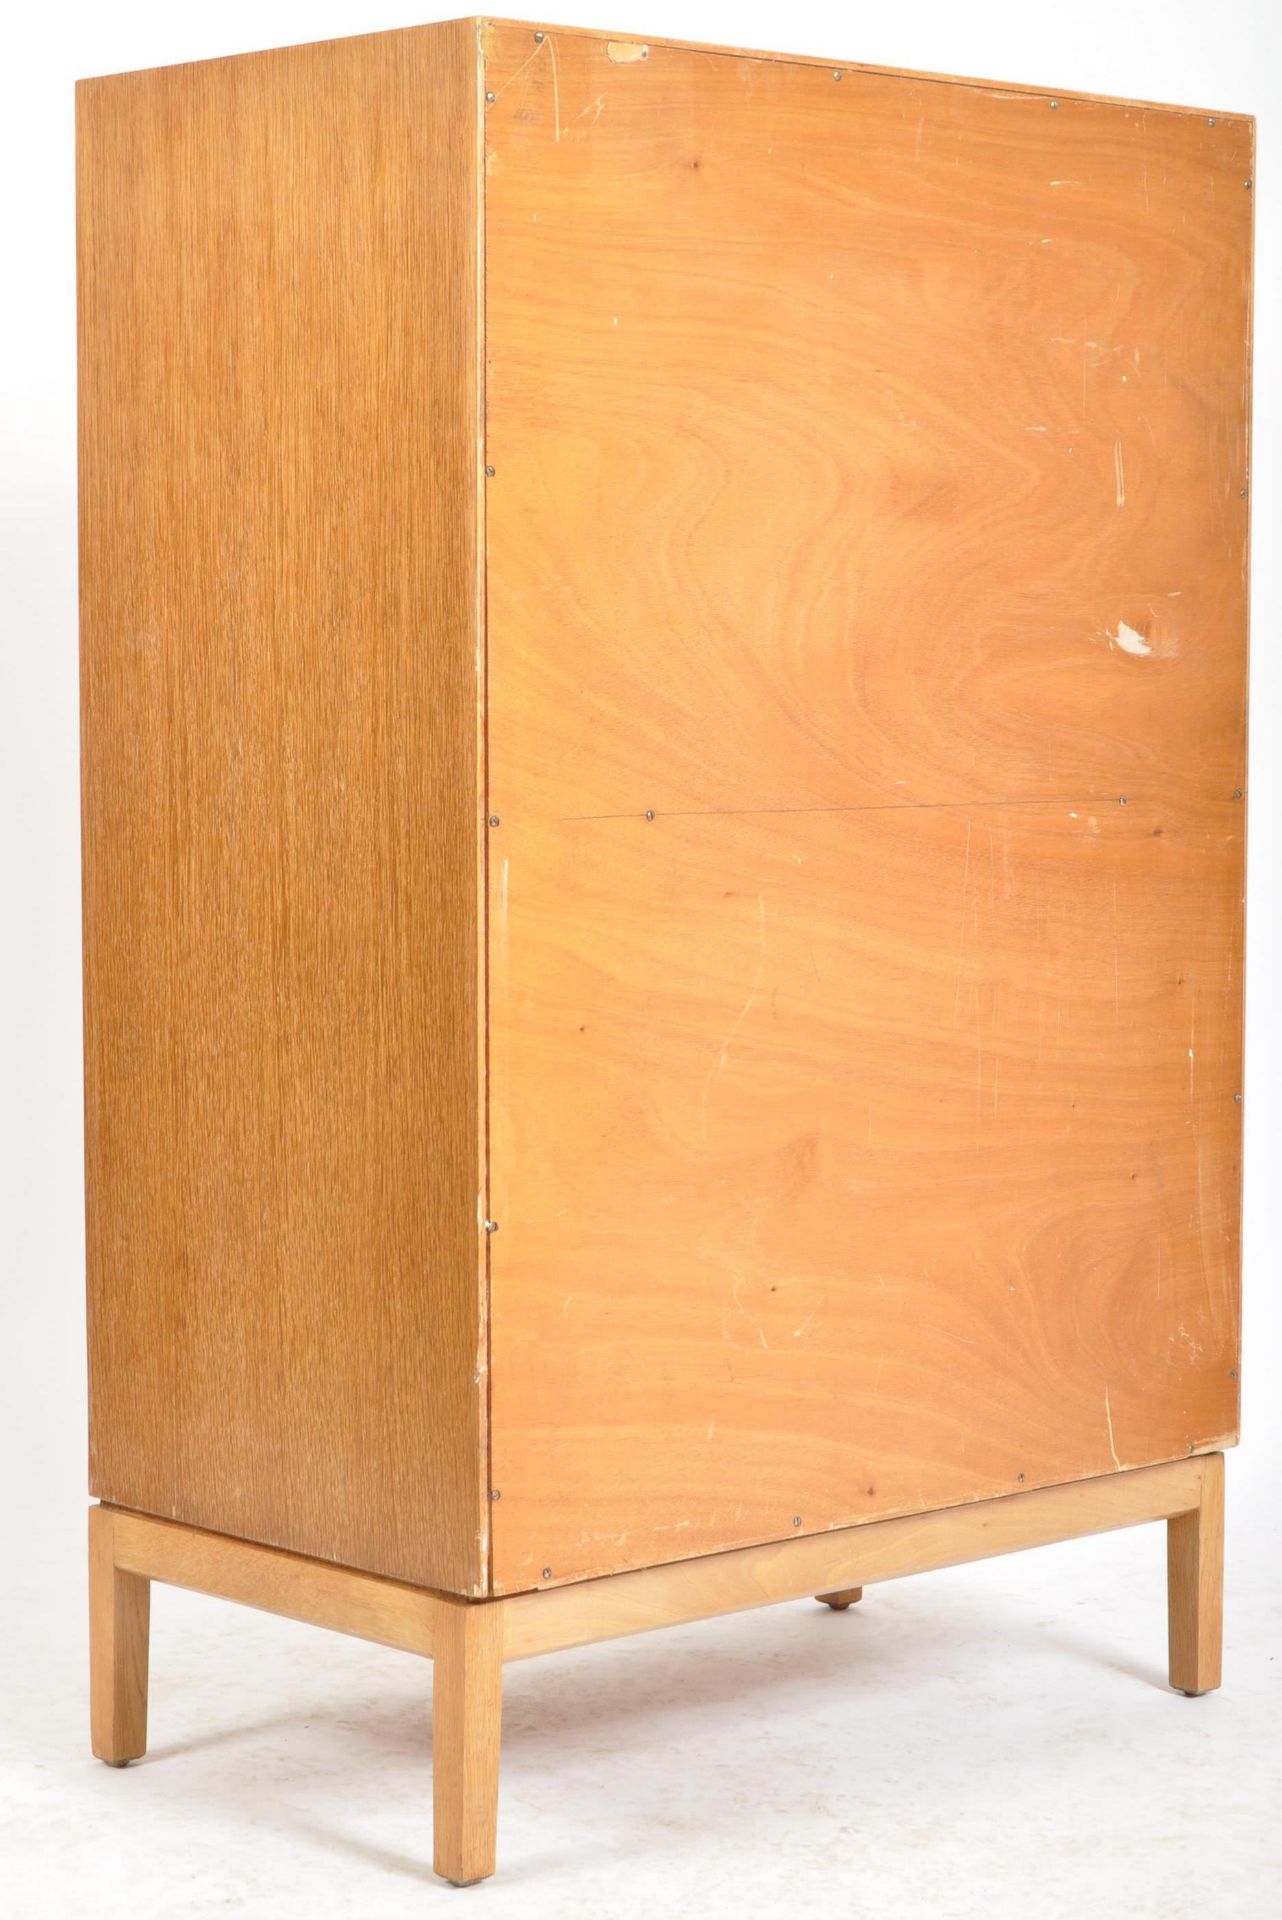 JOHN & SYLVIA REID FOR STAG - MID CENTURY OAK CHEST OF DRAWERS - Image 6 of 6